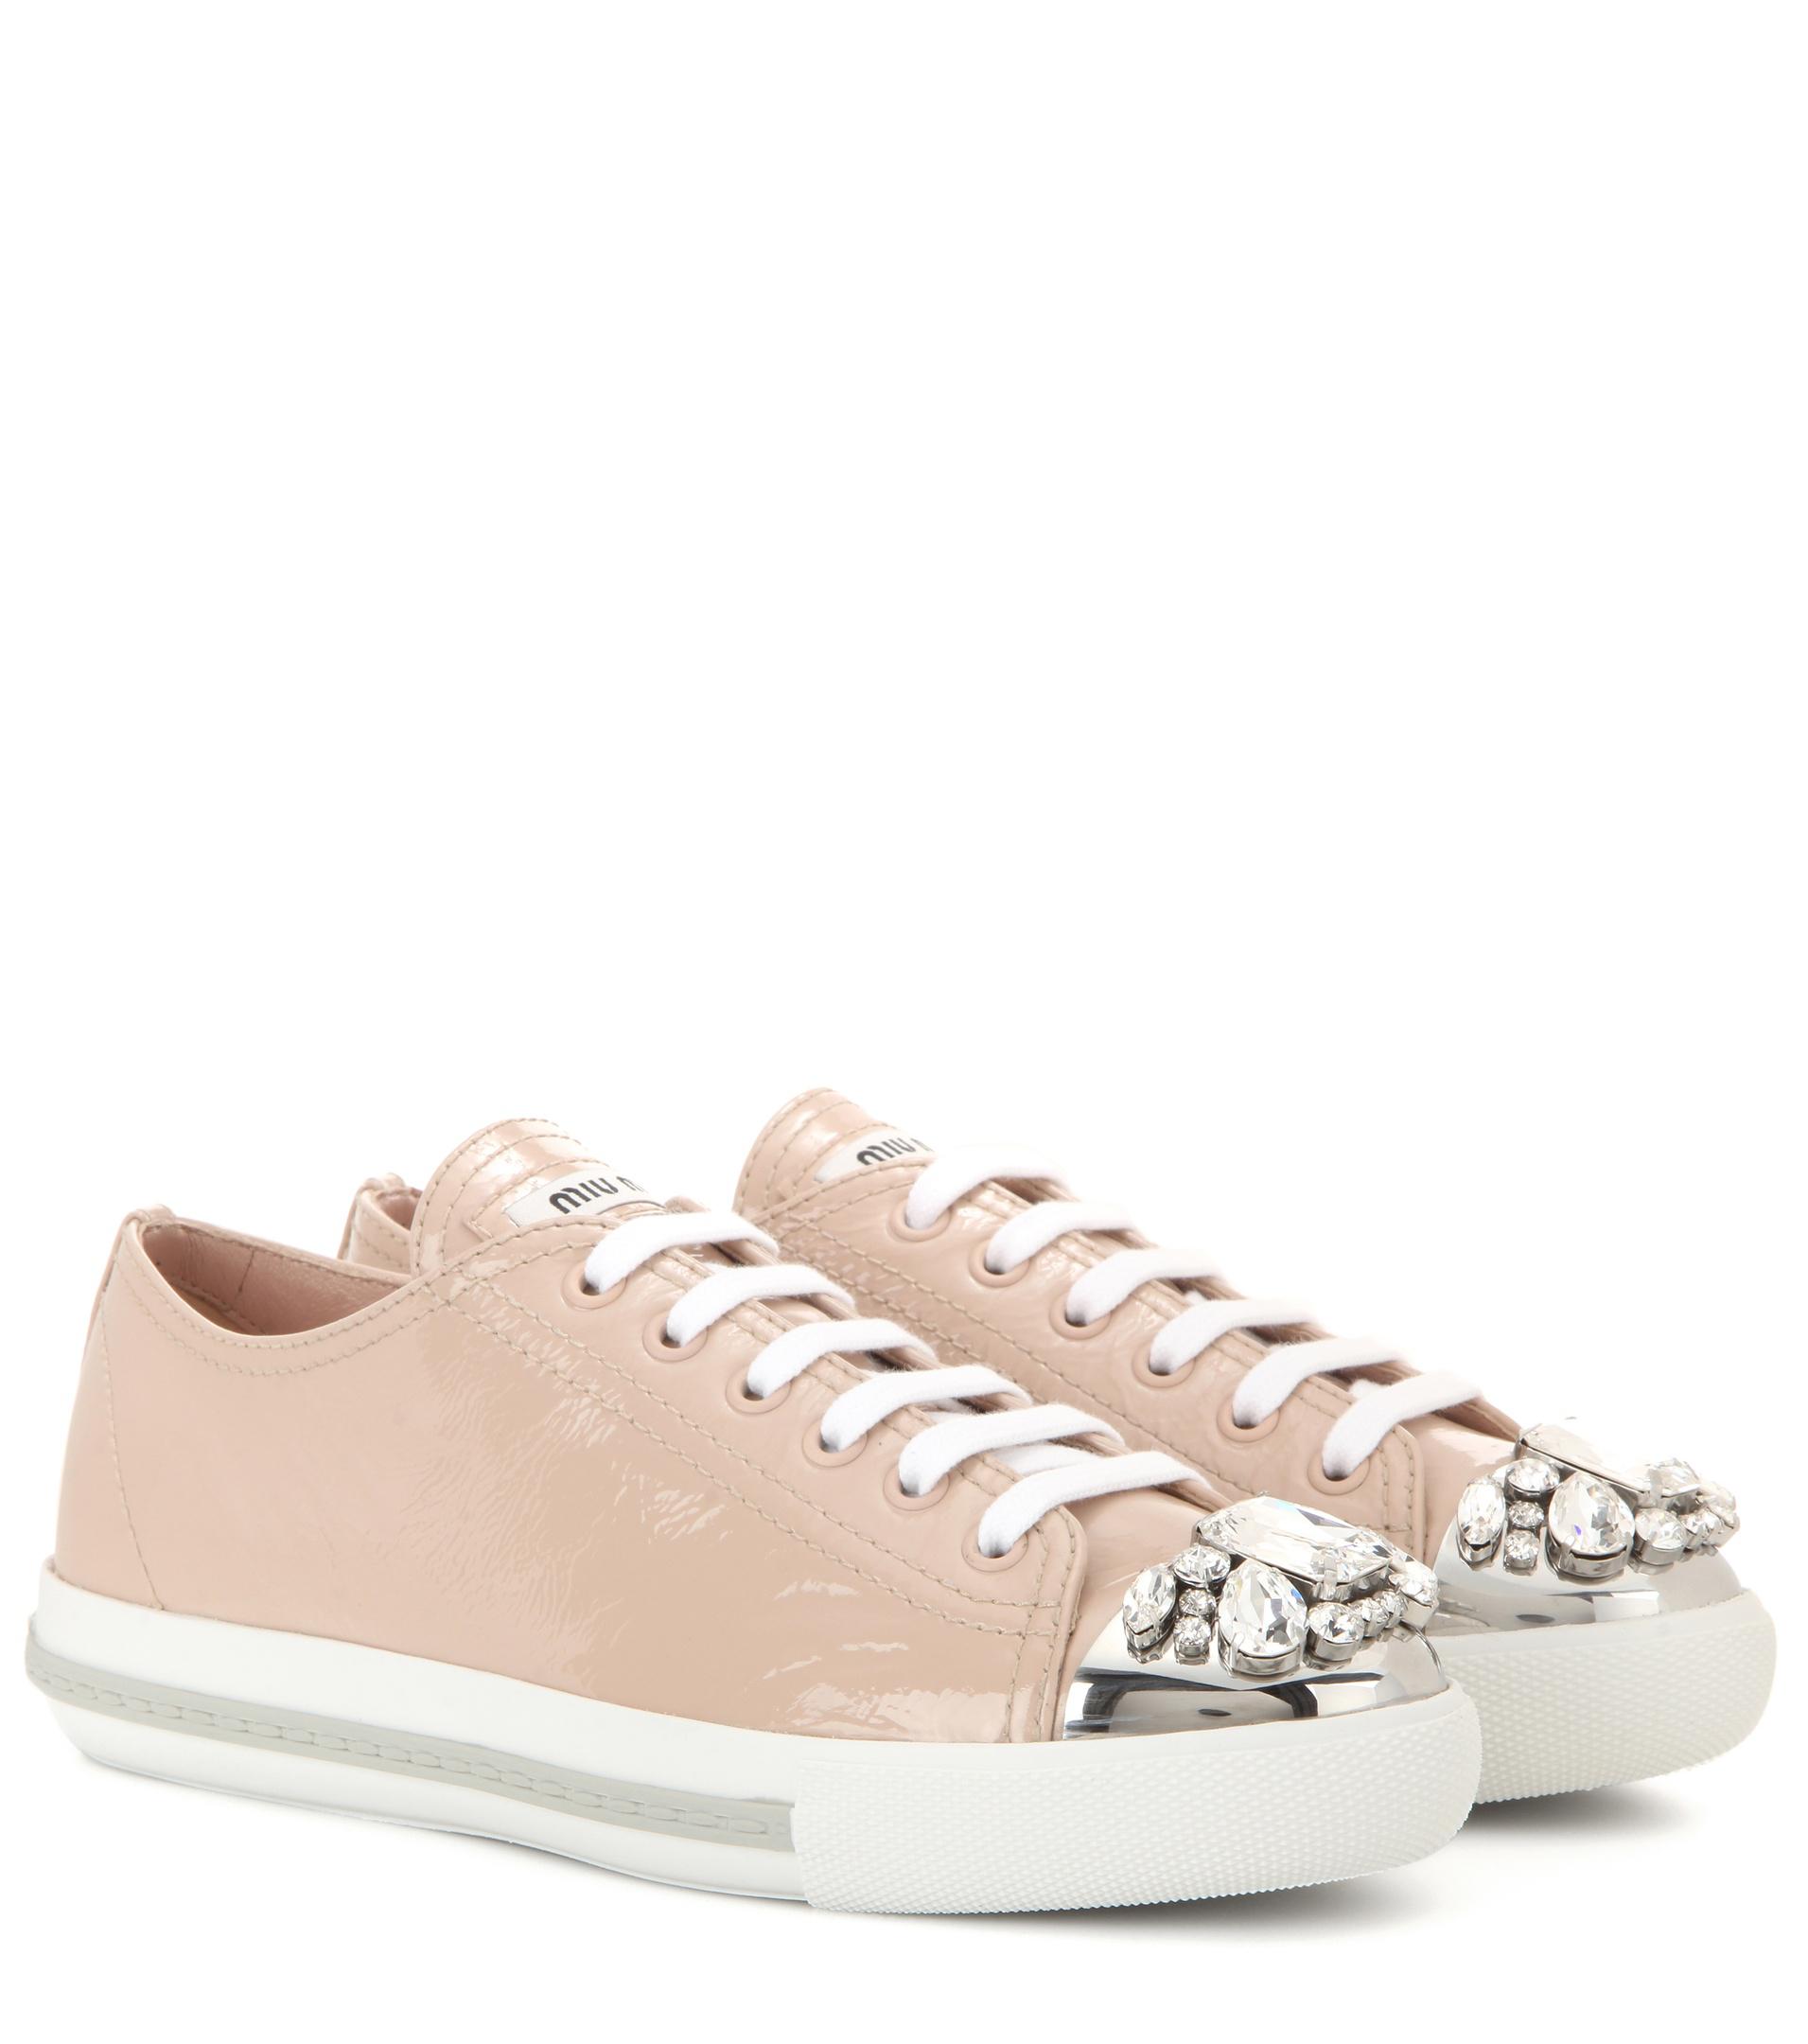 Miu Miu Crystal-Embellished Patent Leather Sneakers in Natural - Lyst